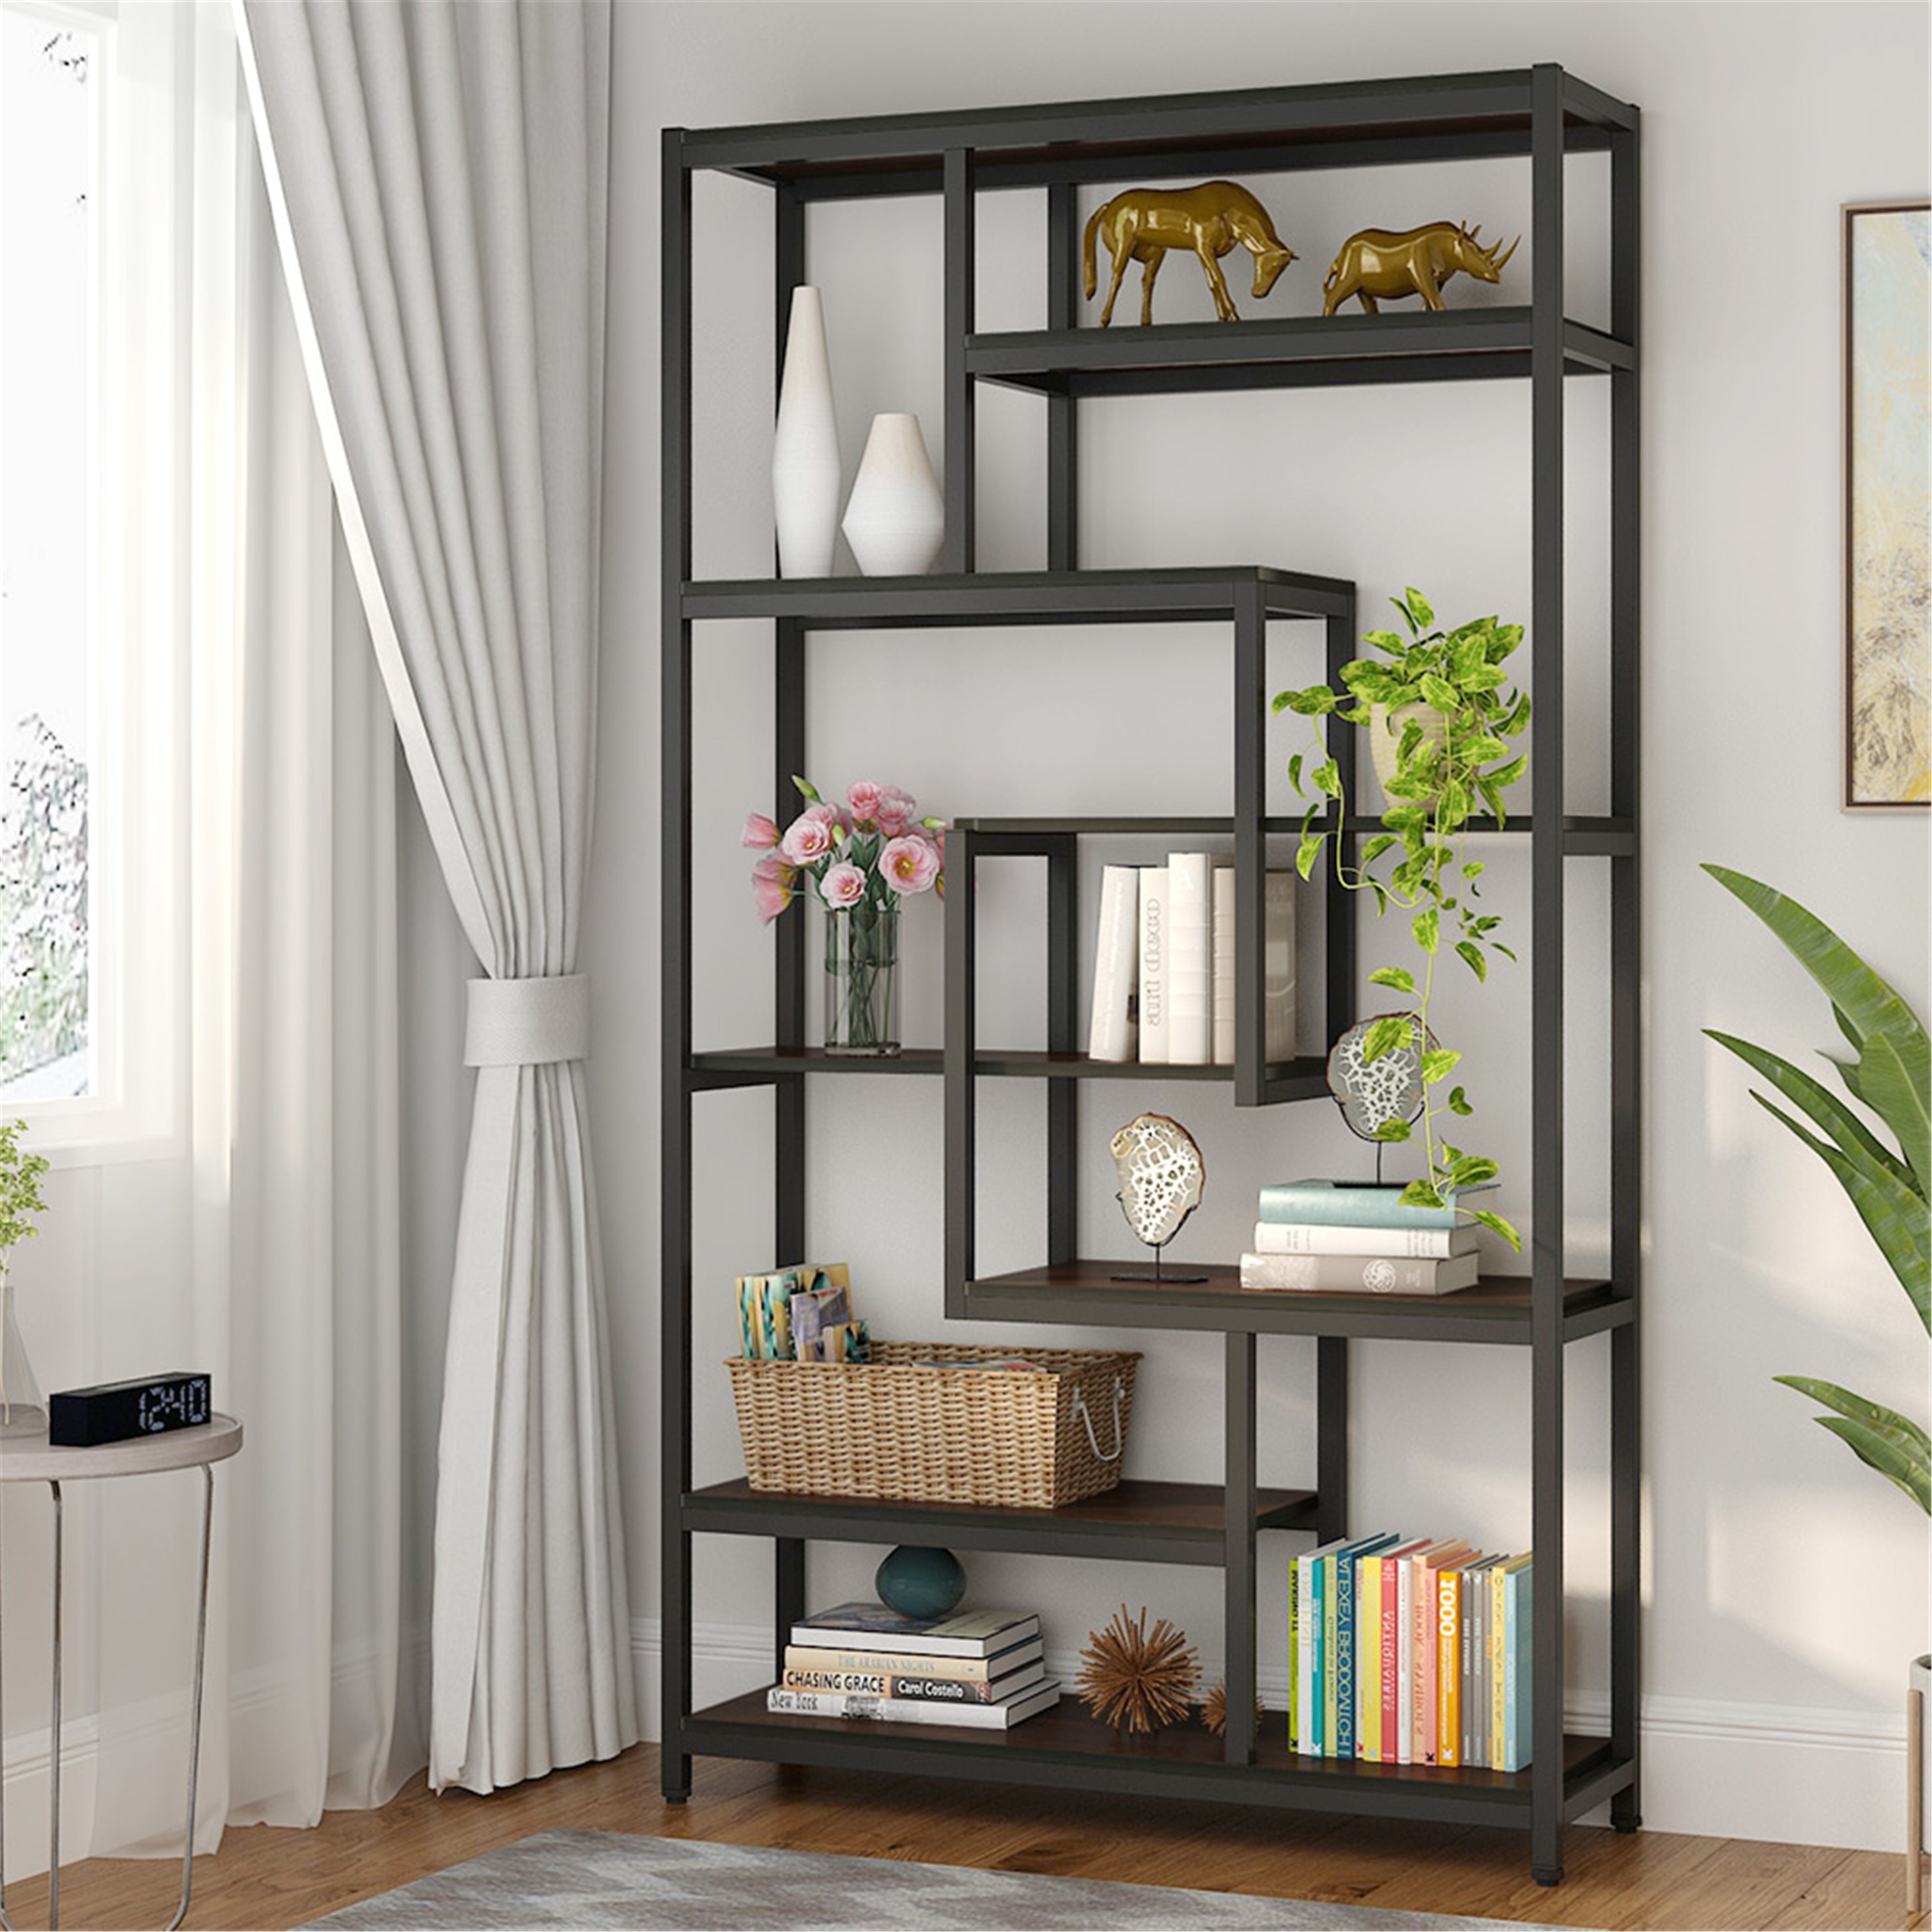 https://ak1.ostkcdn.com/images/products/is/images/direct/11701d3f39a80c70318e1c755c5520076e9aa5e6/8-Shelves-Staggered-Bookshelf-Industrial-Etagere-Bookcase.jpg